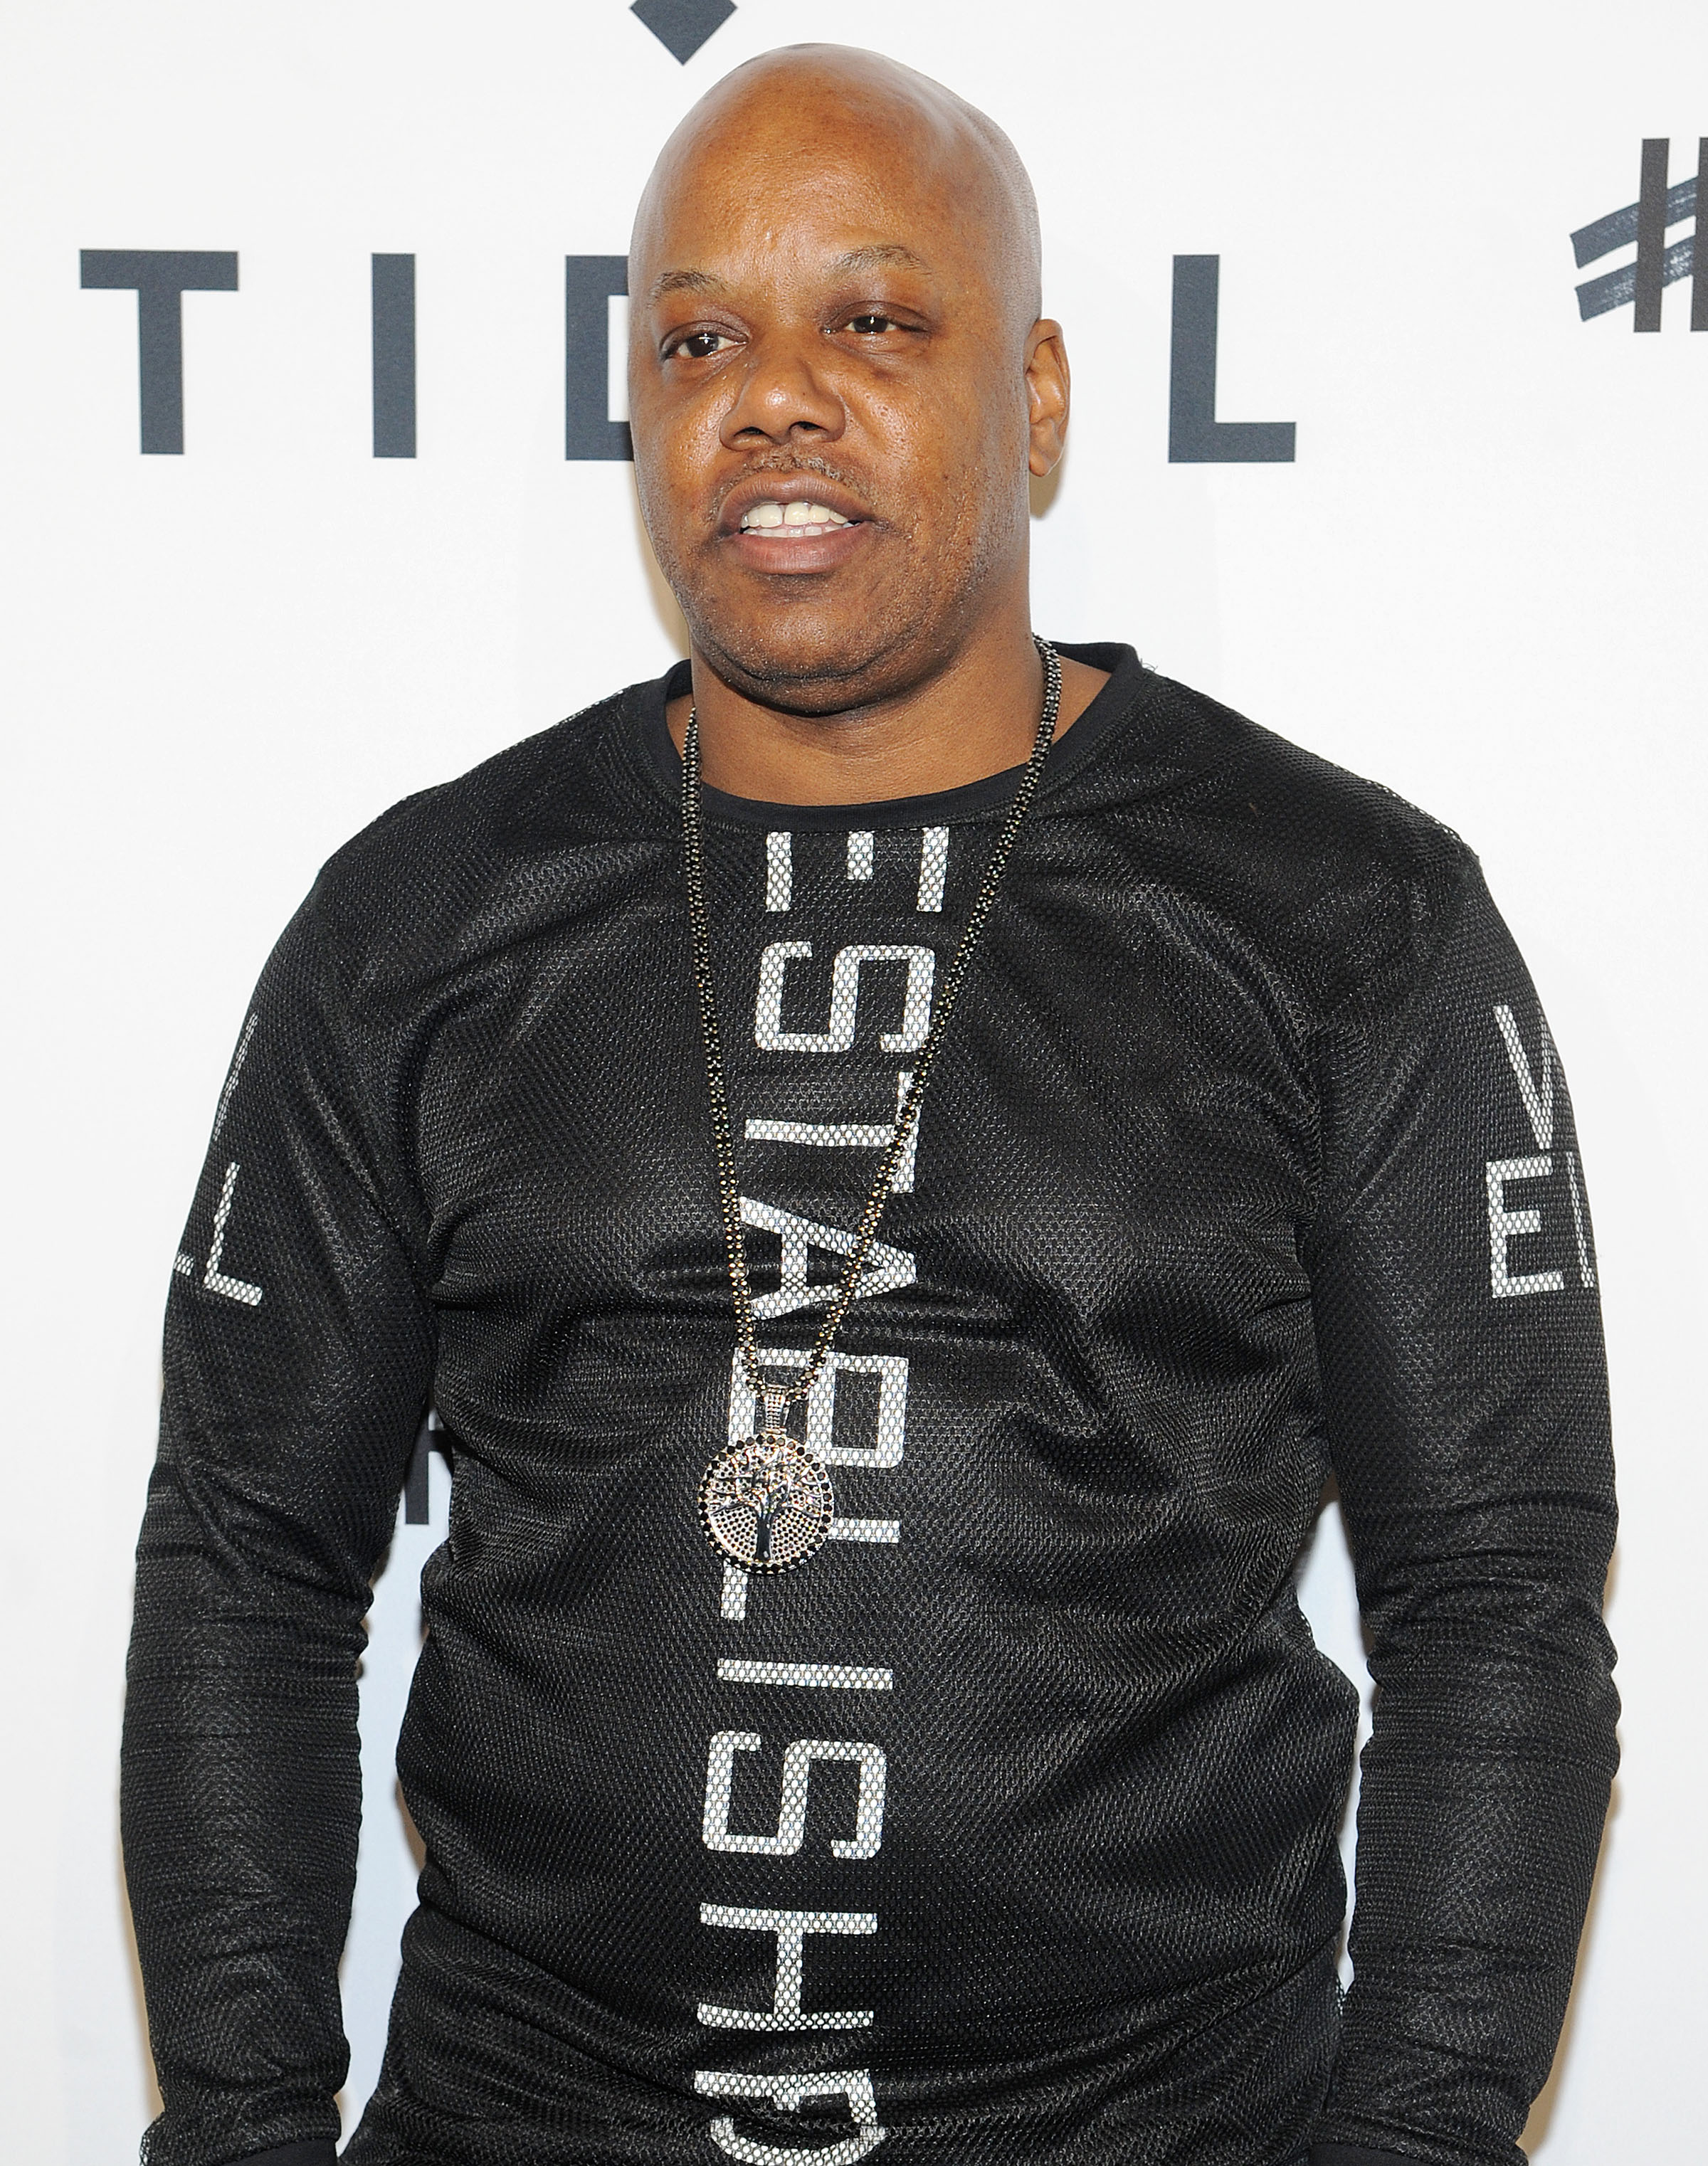 At The Tender Age Of 53 Todd Too Short Shaw Just Became Somebody's  Dear Old Daddy - Bossip